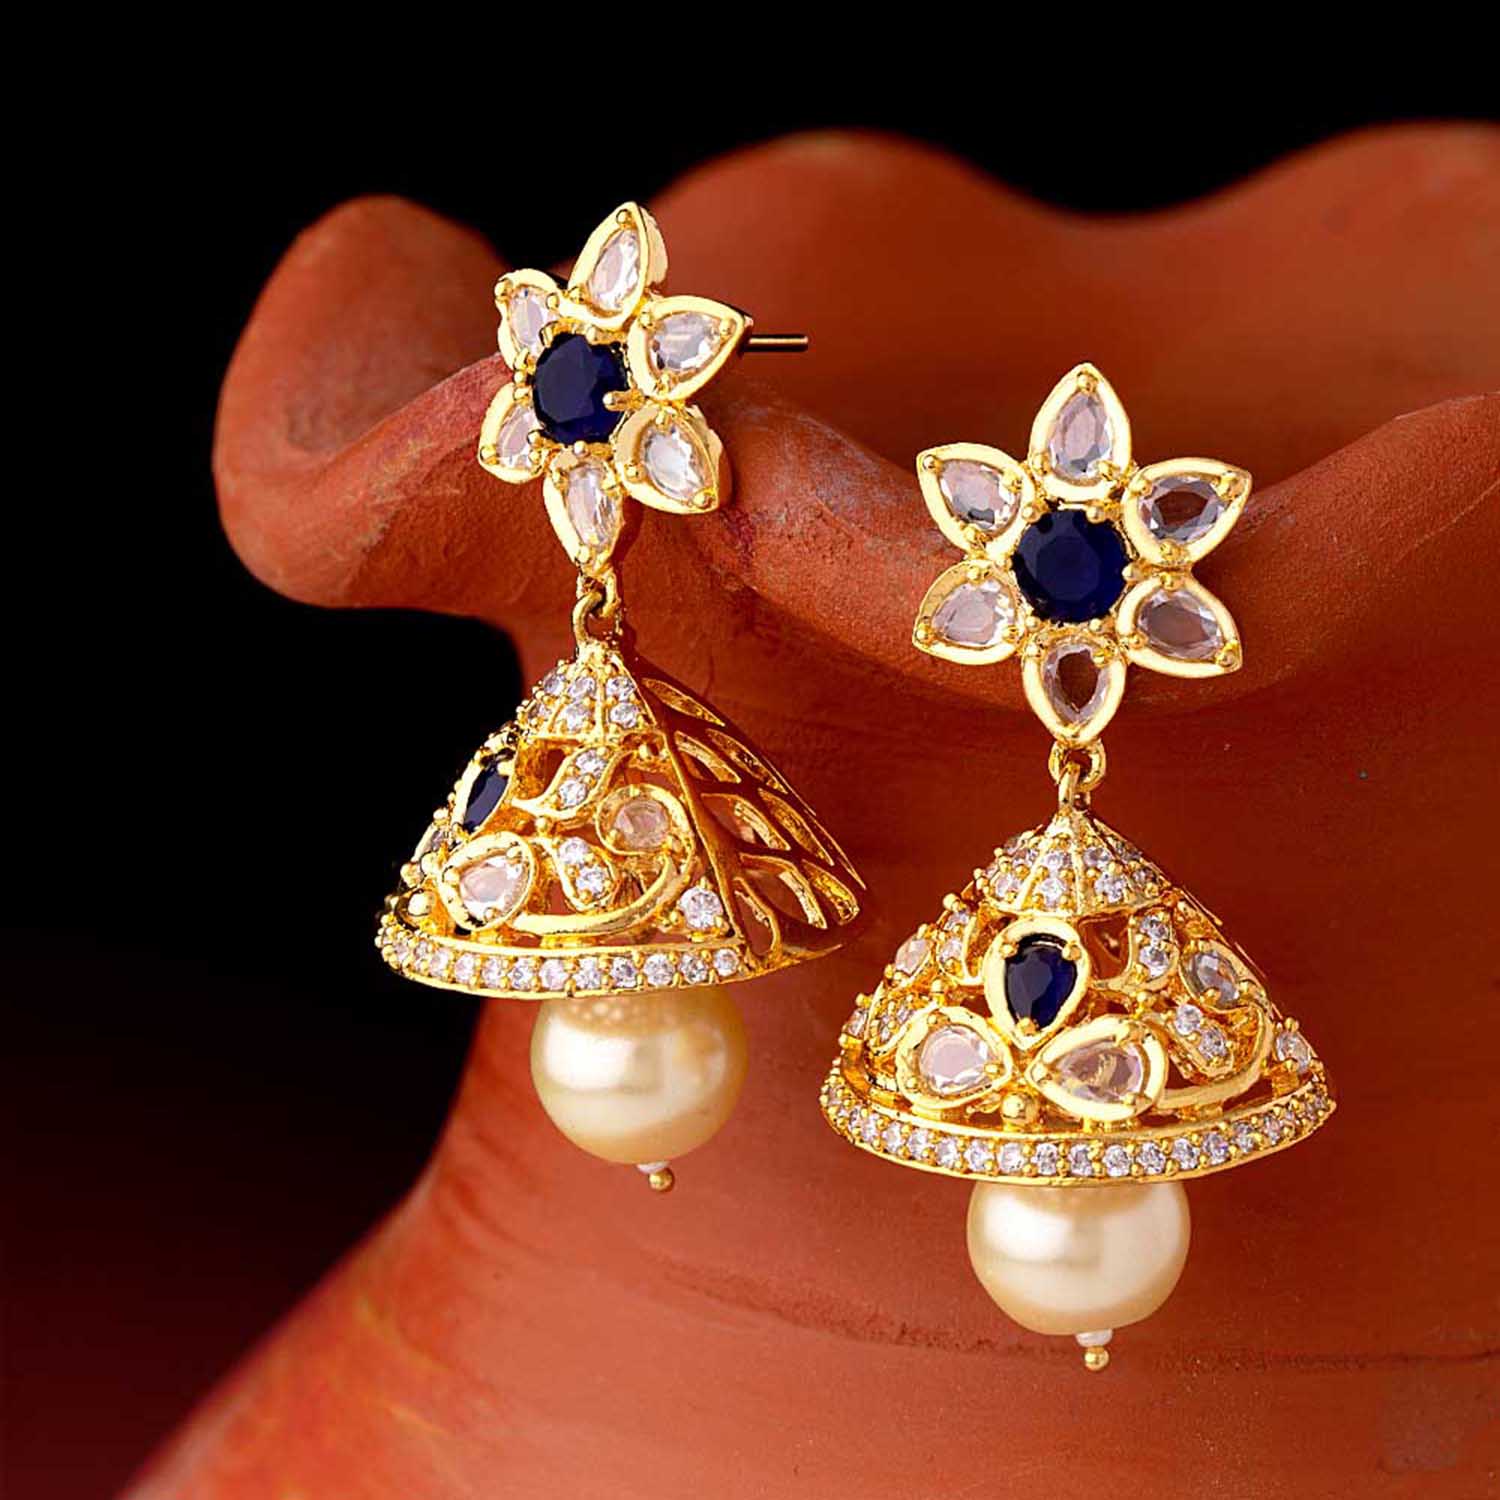 Floral Motifs and CZ Gems Earrings